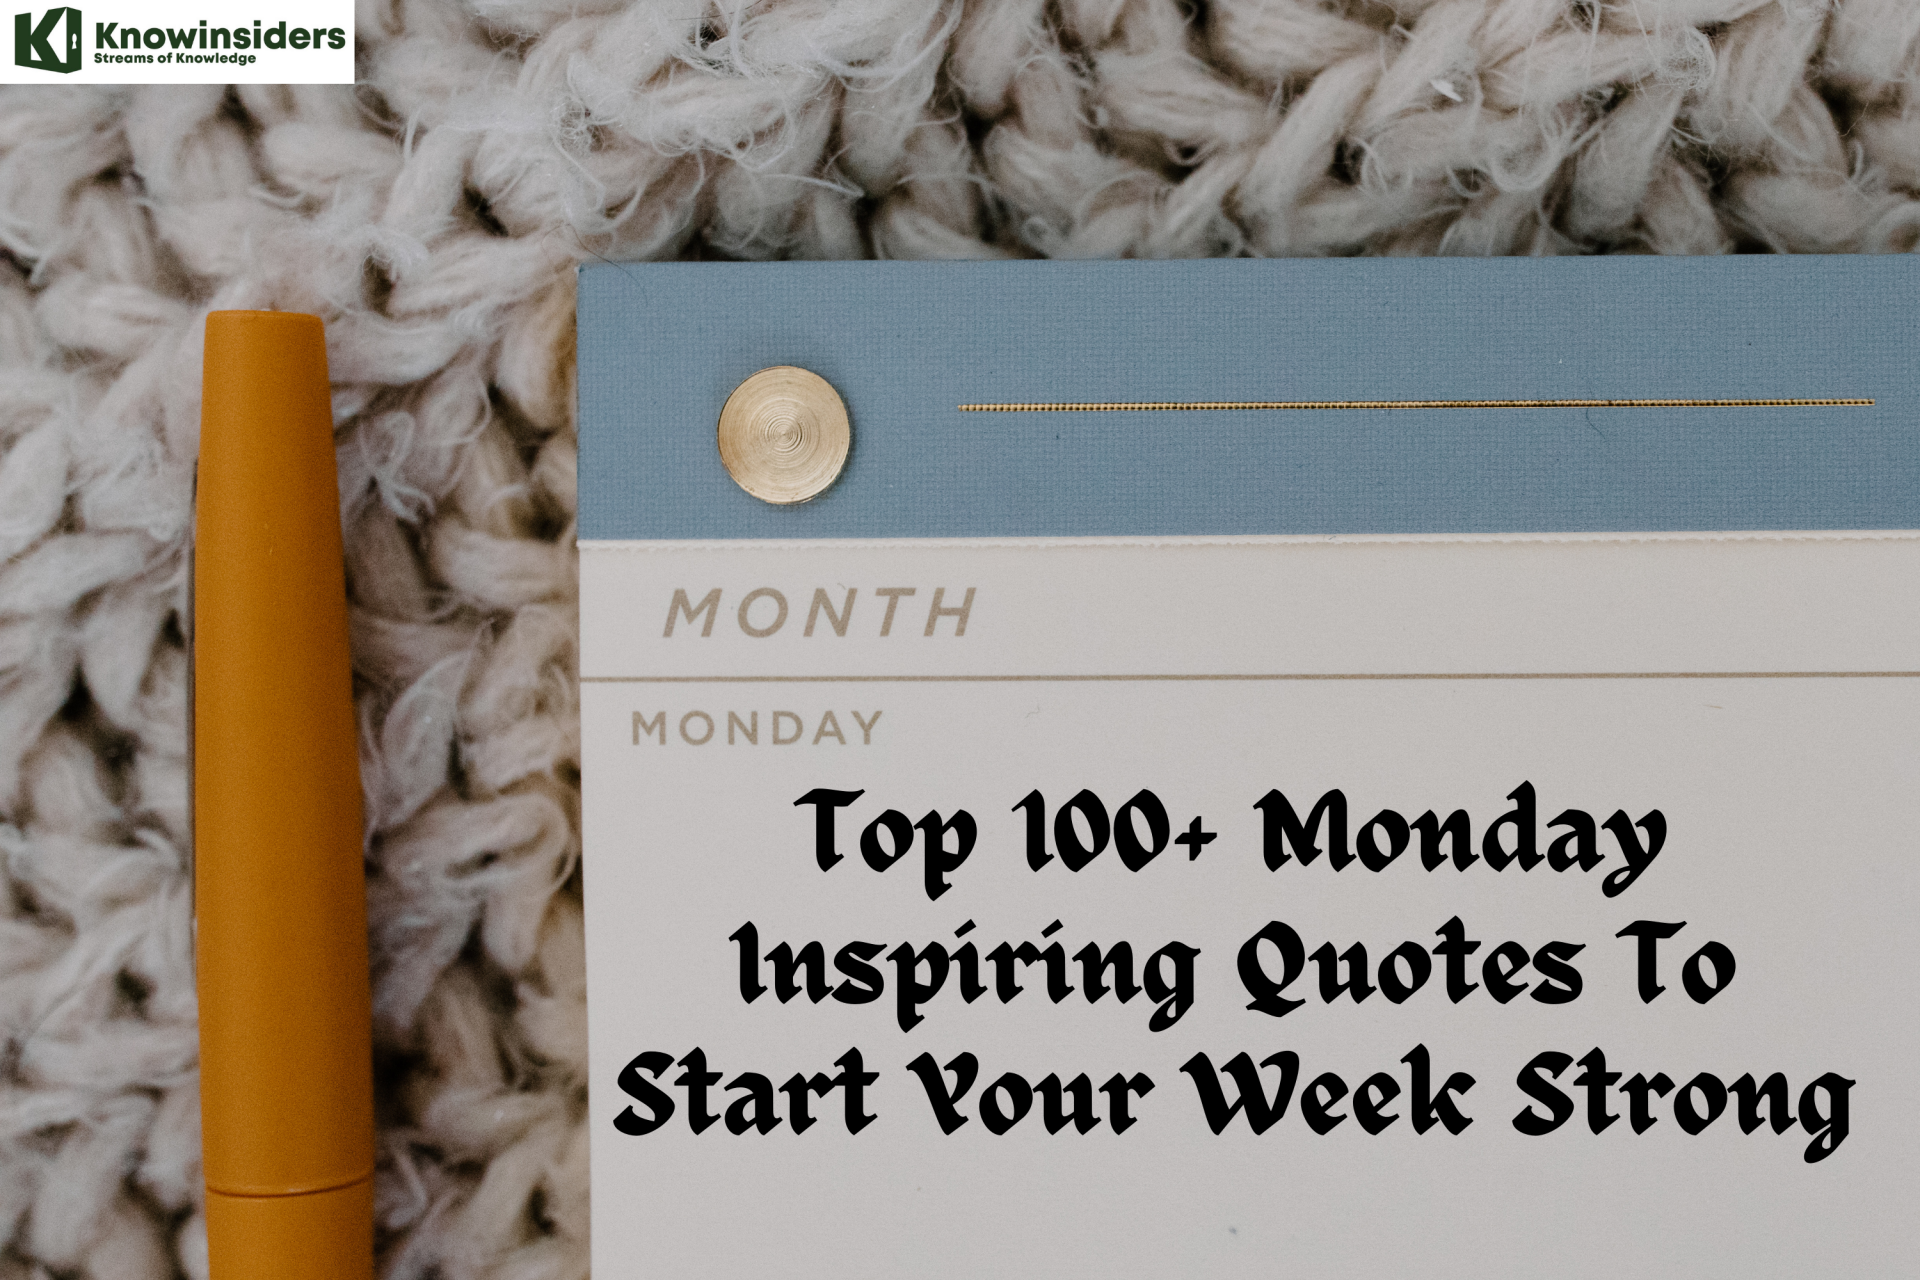 Top 100+ Monday Inpirational Quotes To Start the Energetic Week